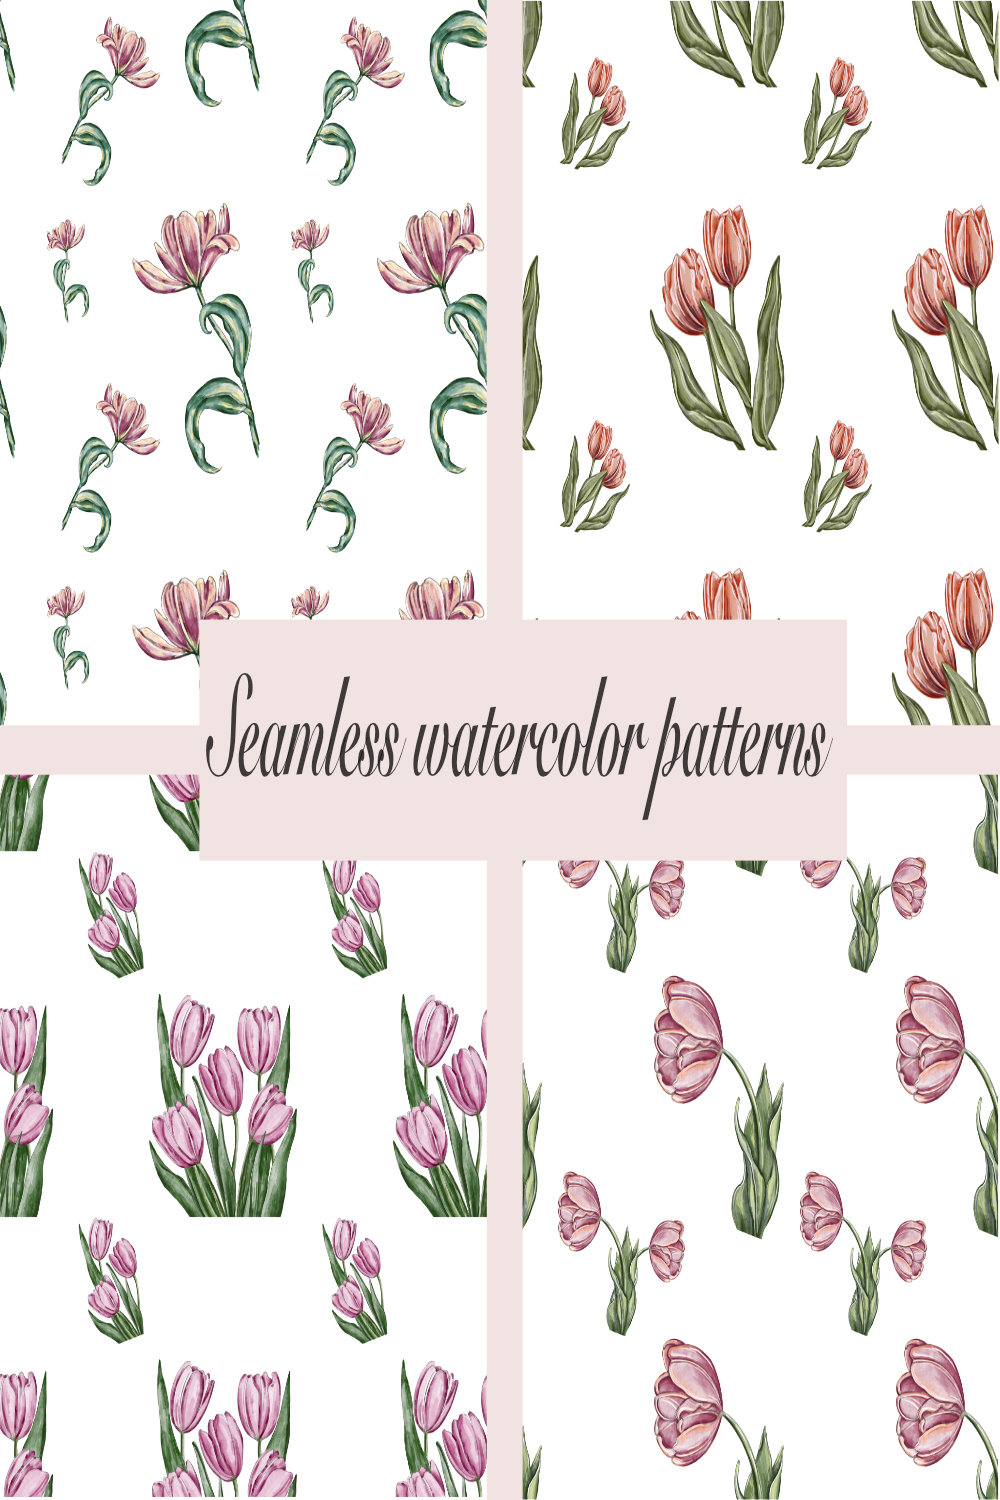 Seamless watercolor patterns pinterest preview image.